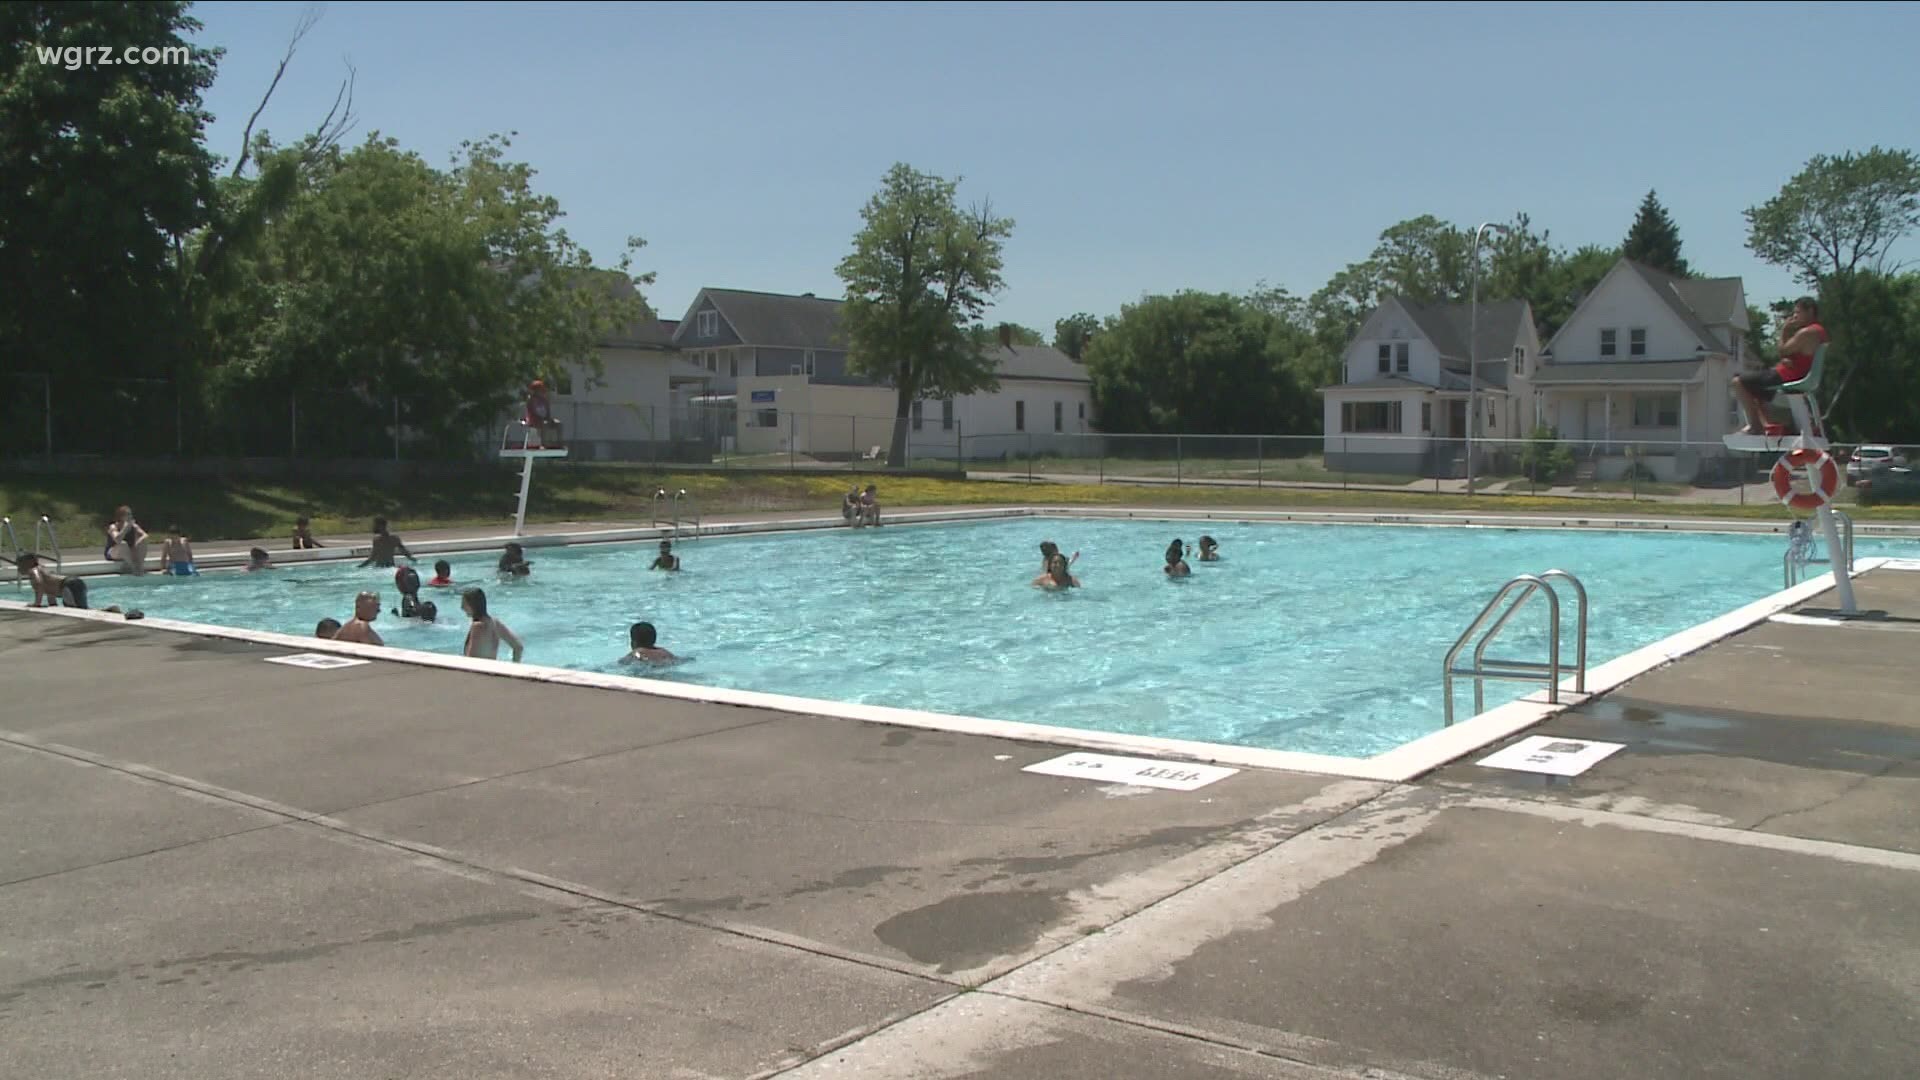 skjule Børnepalads ophobe It's unlikely Buffalo will open outdoor swimming pools later this summer |  wgrz.com